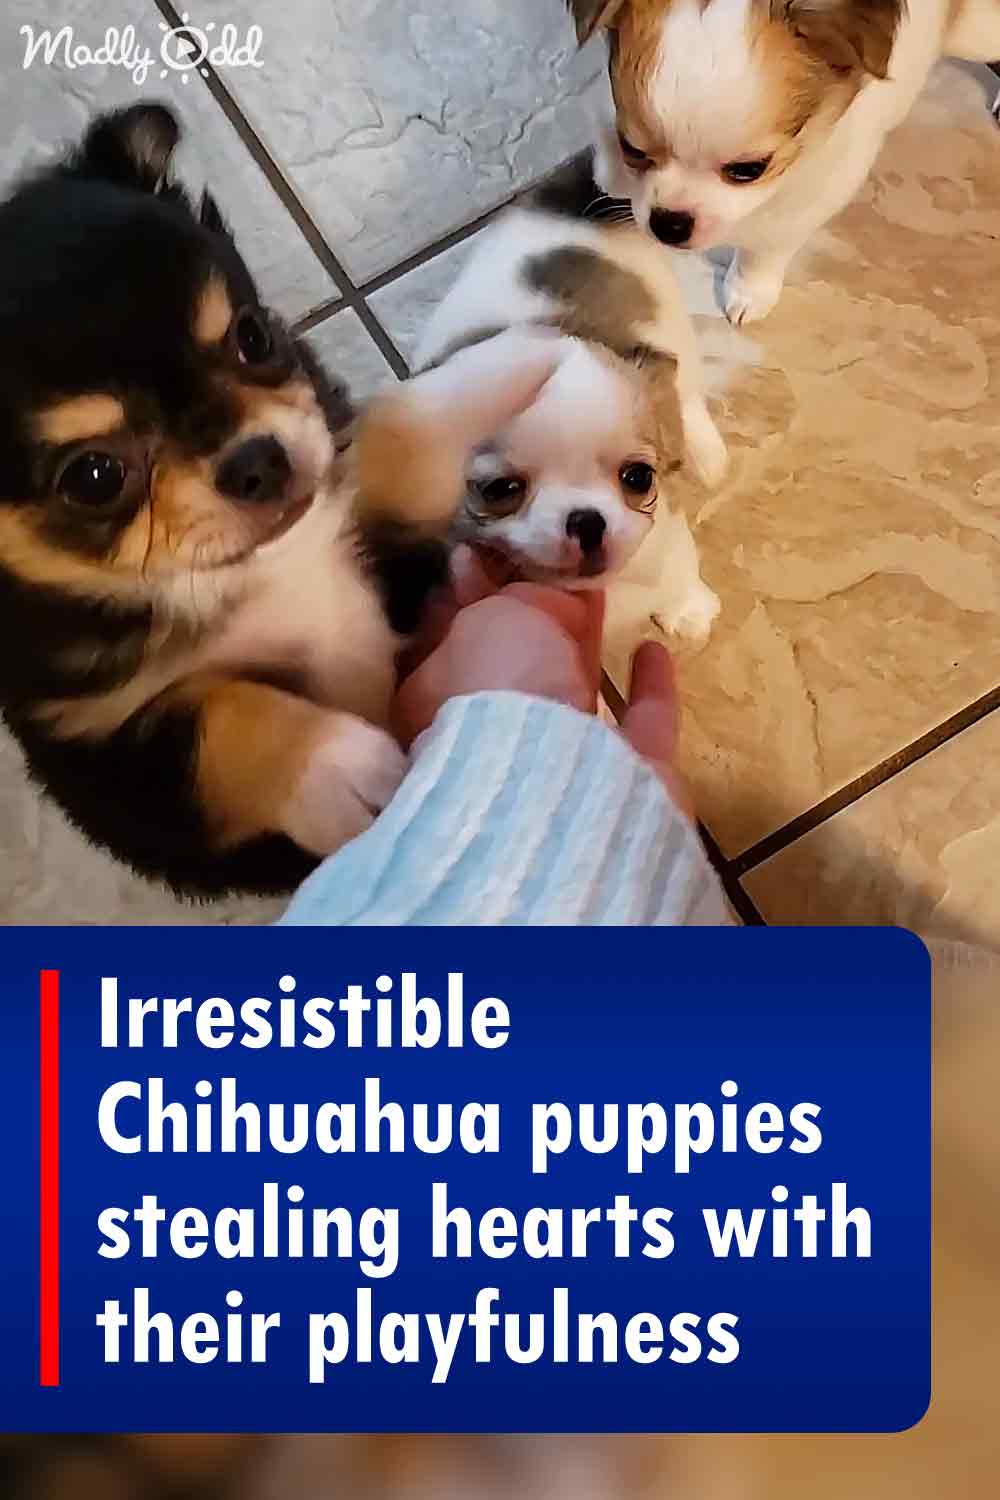 Irresistible Chihuahua puppies stealing hearts with their playfulness